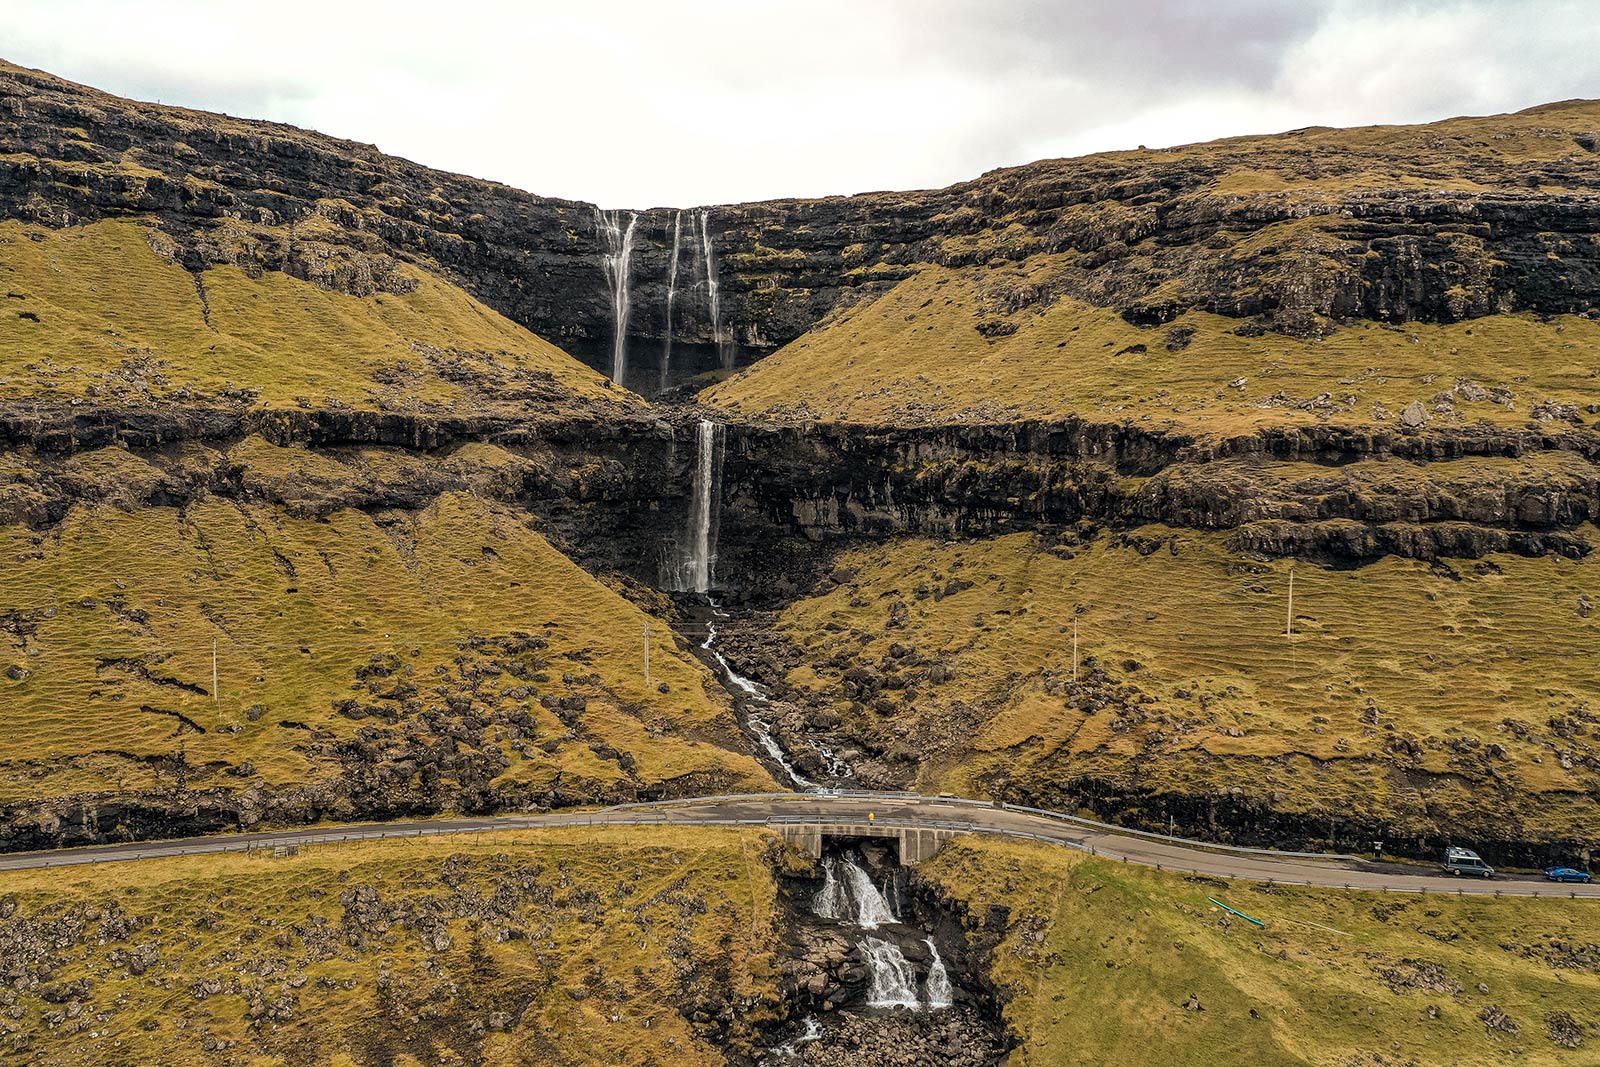 Rugged landscapes at Gjogv in Faroe Islands. Full guide & itinerary for the Faroe Islands